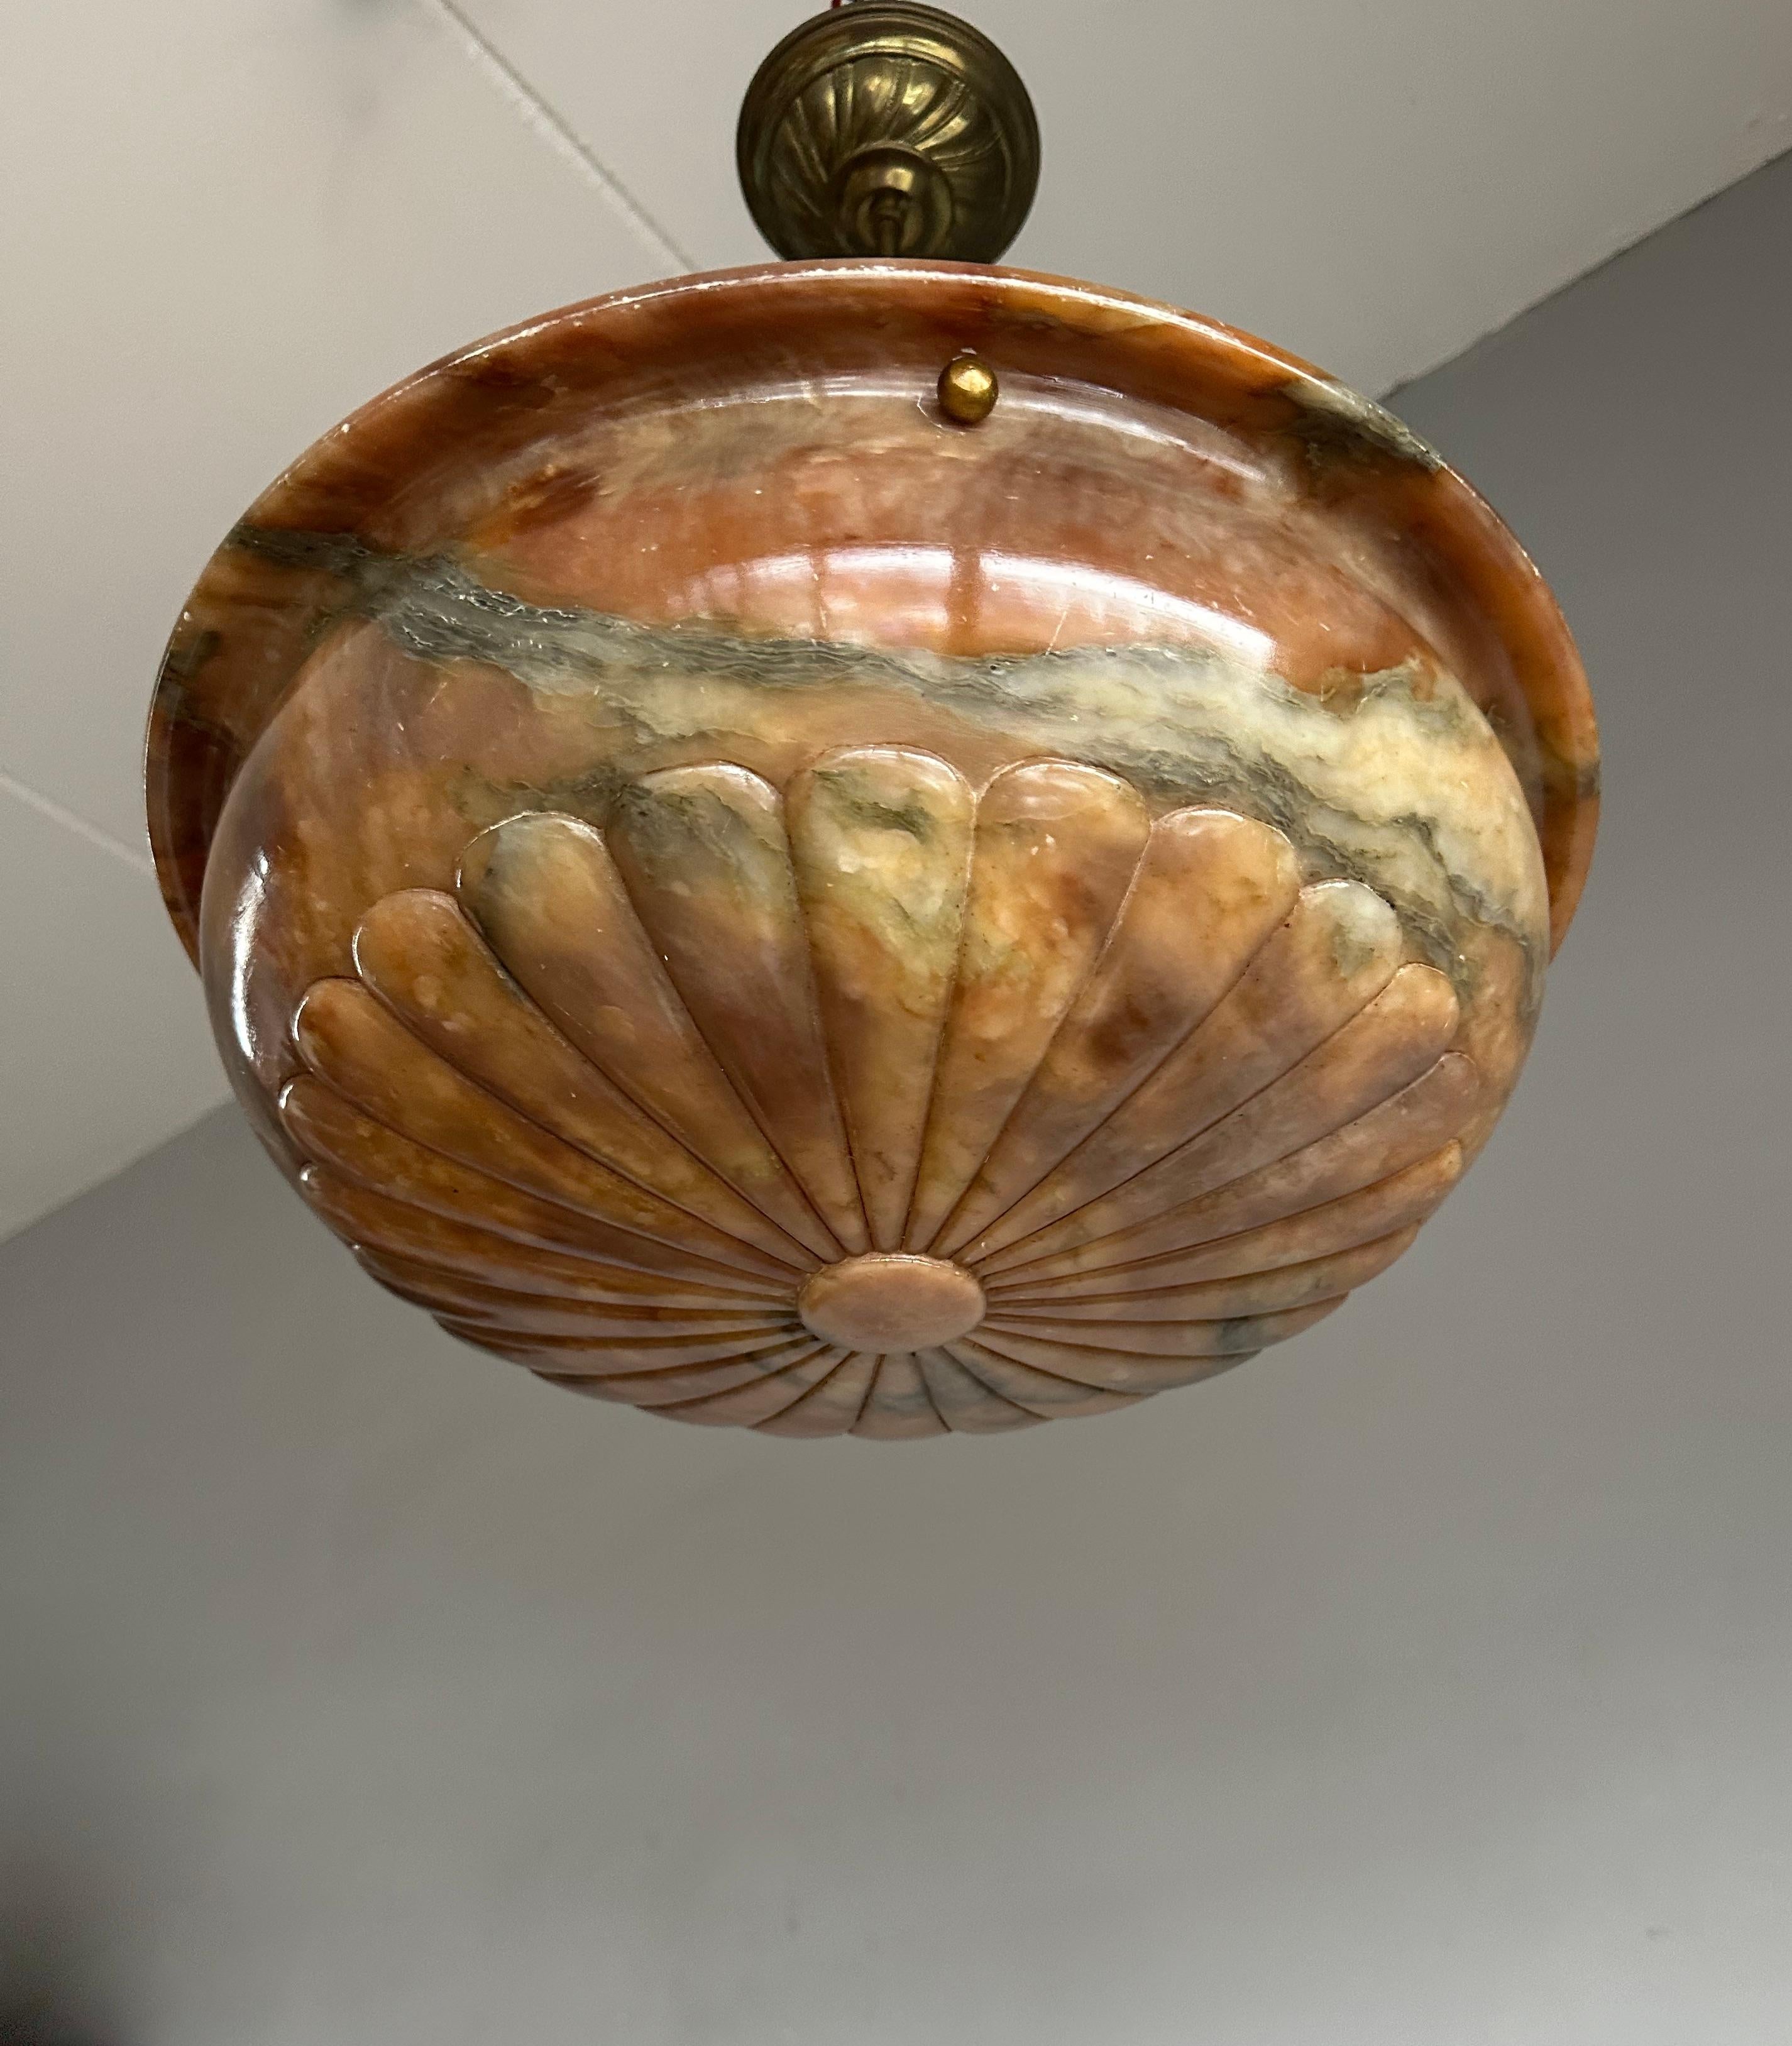 Perfectly Design Antique Alabaster Chandelier / Pendant Light in Mint Condition For Sale 4